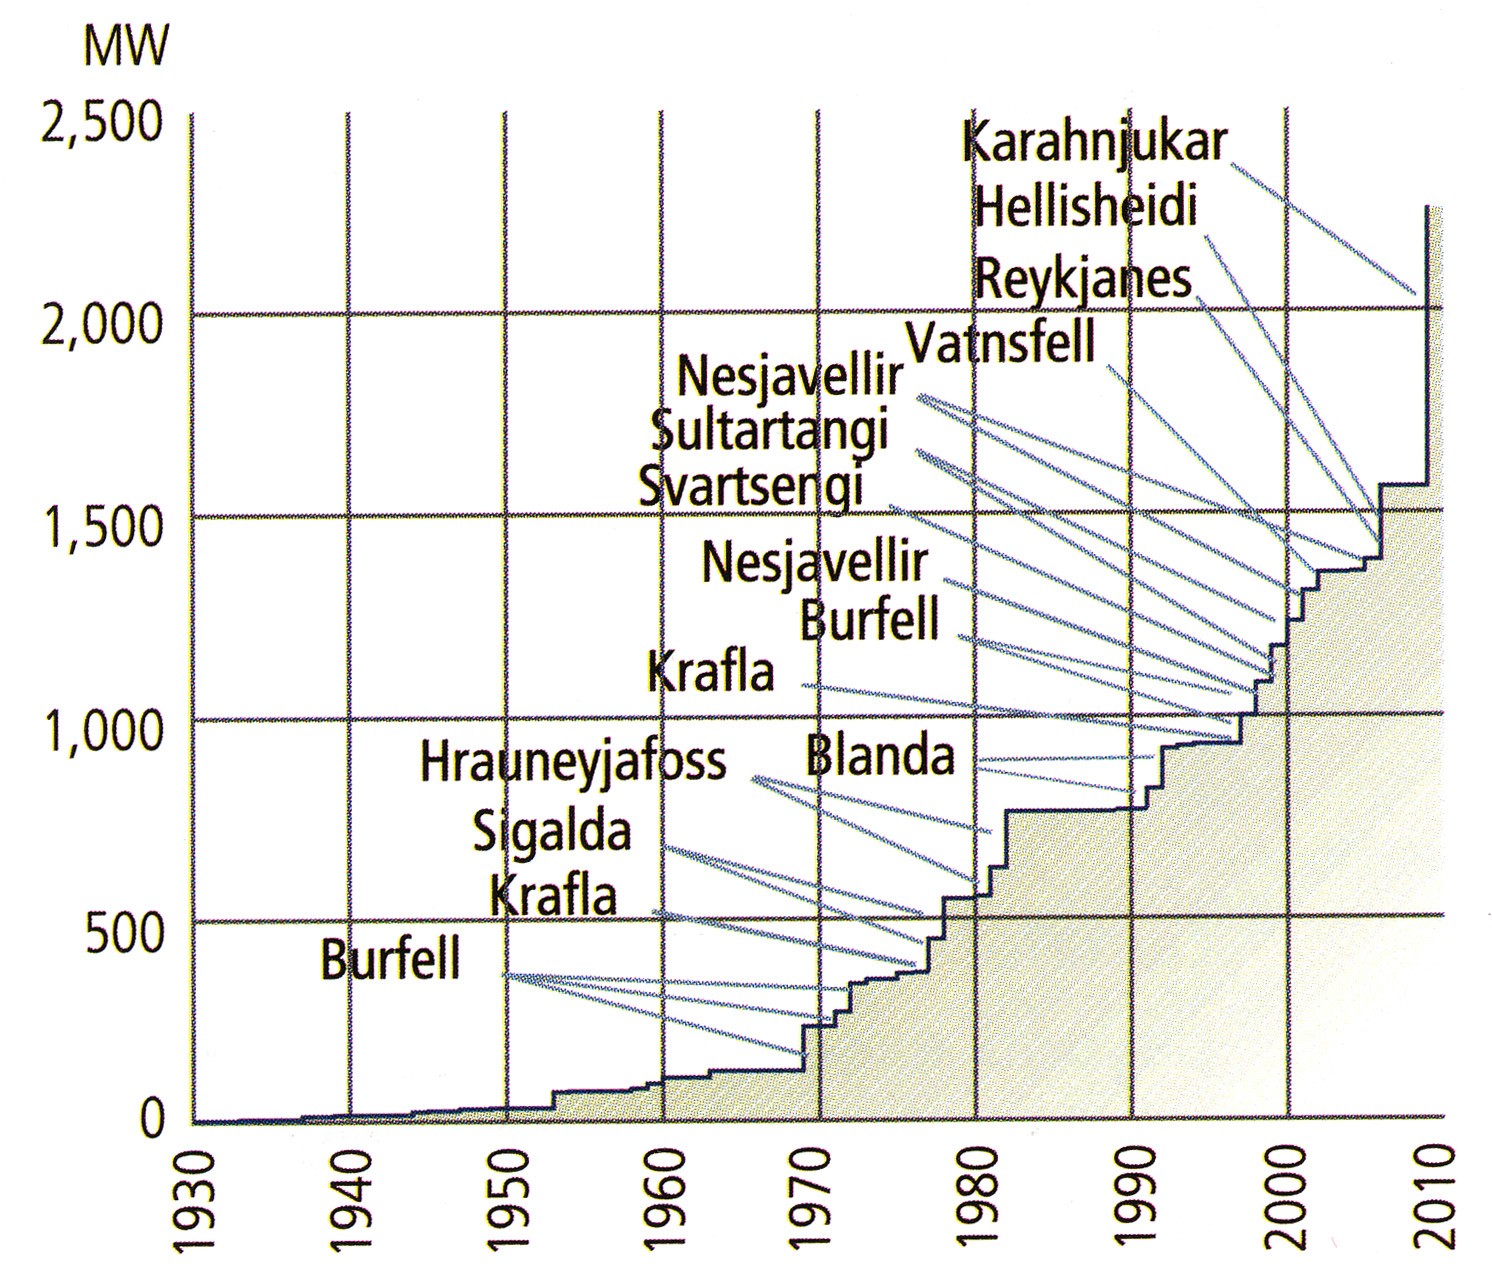 Fig 4. Total installed capacity of hydro and geothermal power plants in Iceland.